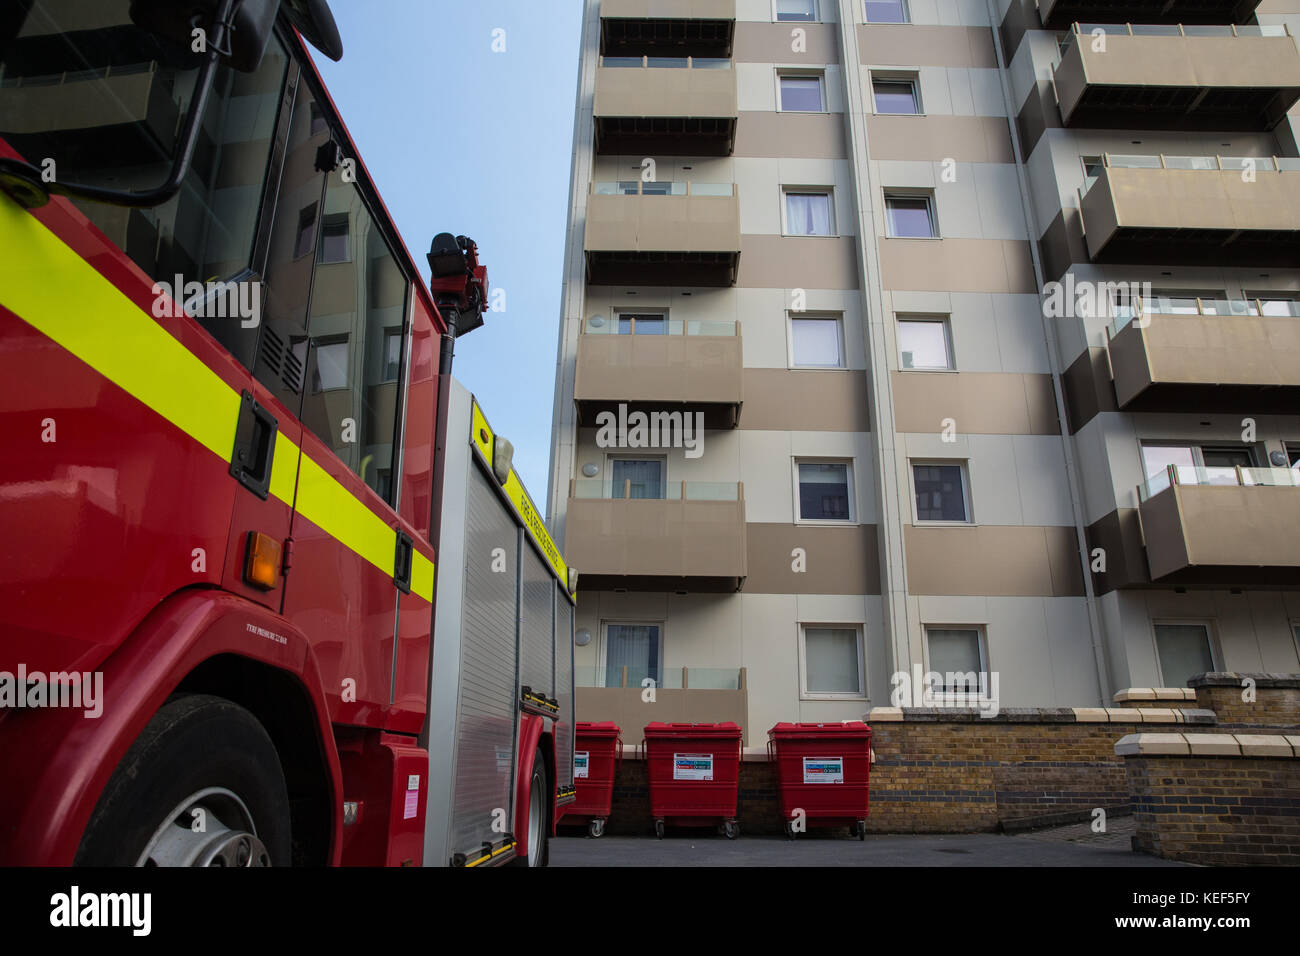 Slough, UK. 20th Oct, 2017. A fire engine and crew are keeping a 24-hour watch on privately-owned Nova House at an estimated cost to the taxpayer of £2,000 per day after post-Grenfell fire brigade and council investigations revealed unsafe cladding and multiple fire safety faults. Credit: Mark Kerrison/Alamy Live News Stock Photo